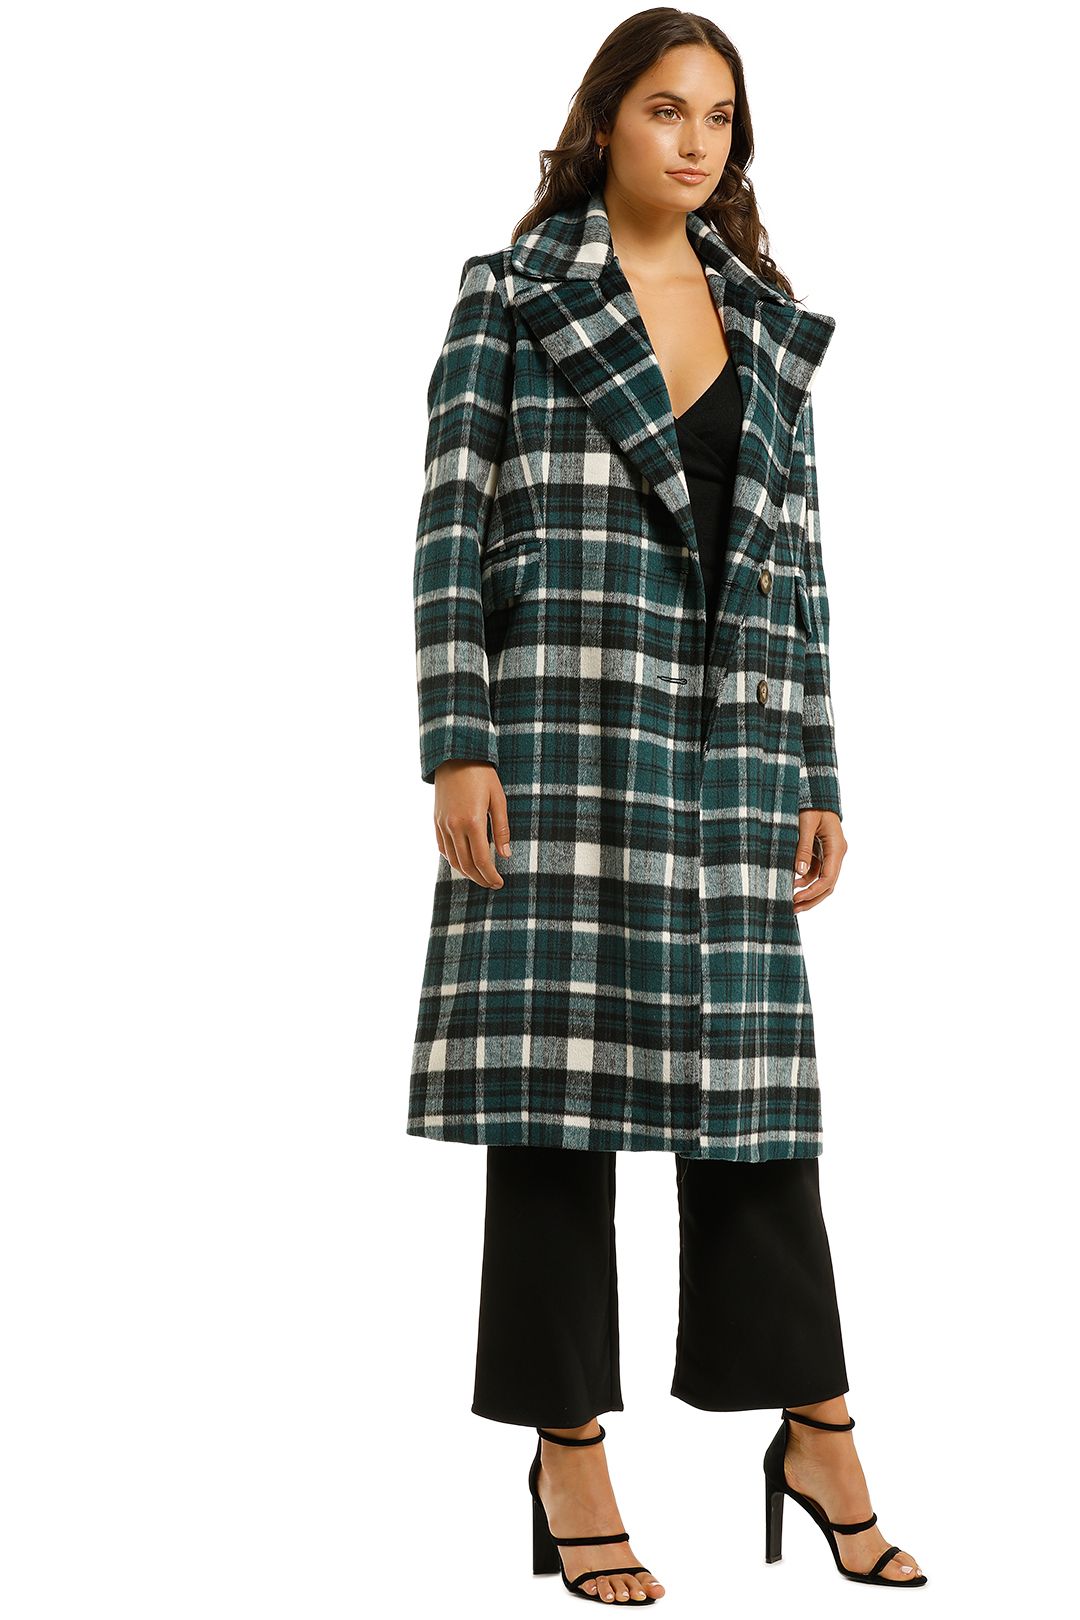 Curate-by-Trelise-Cooper-Little-Coaty-Coat-Green-Check-Side